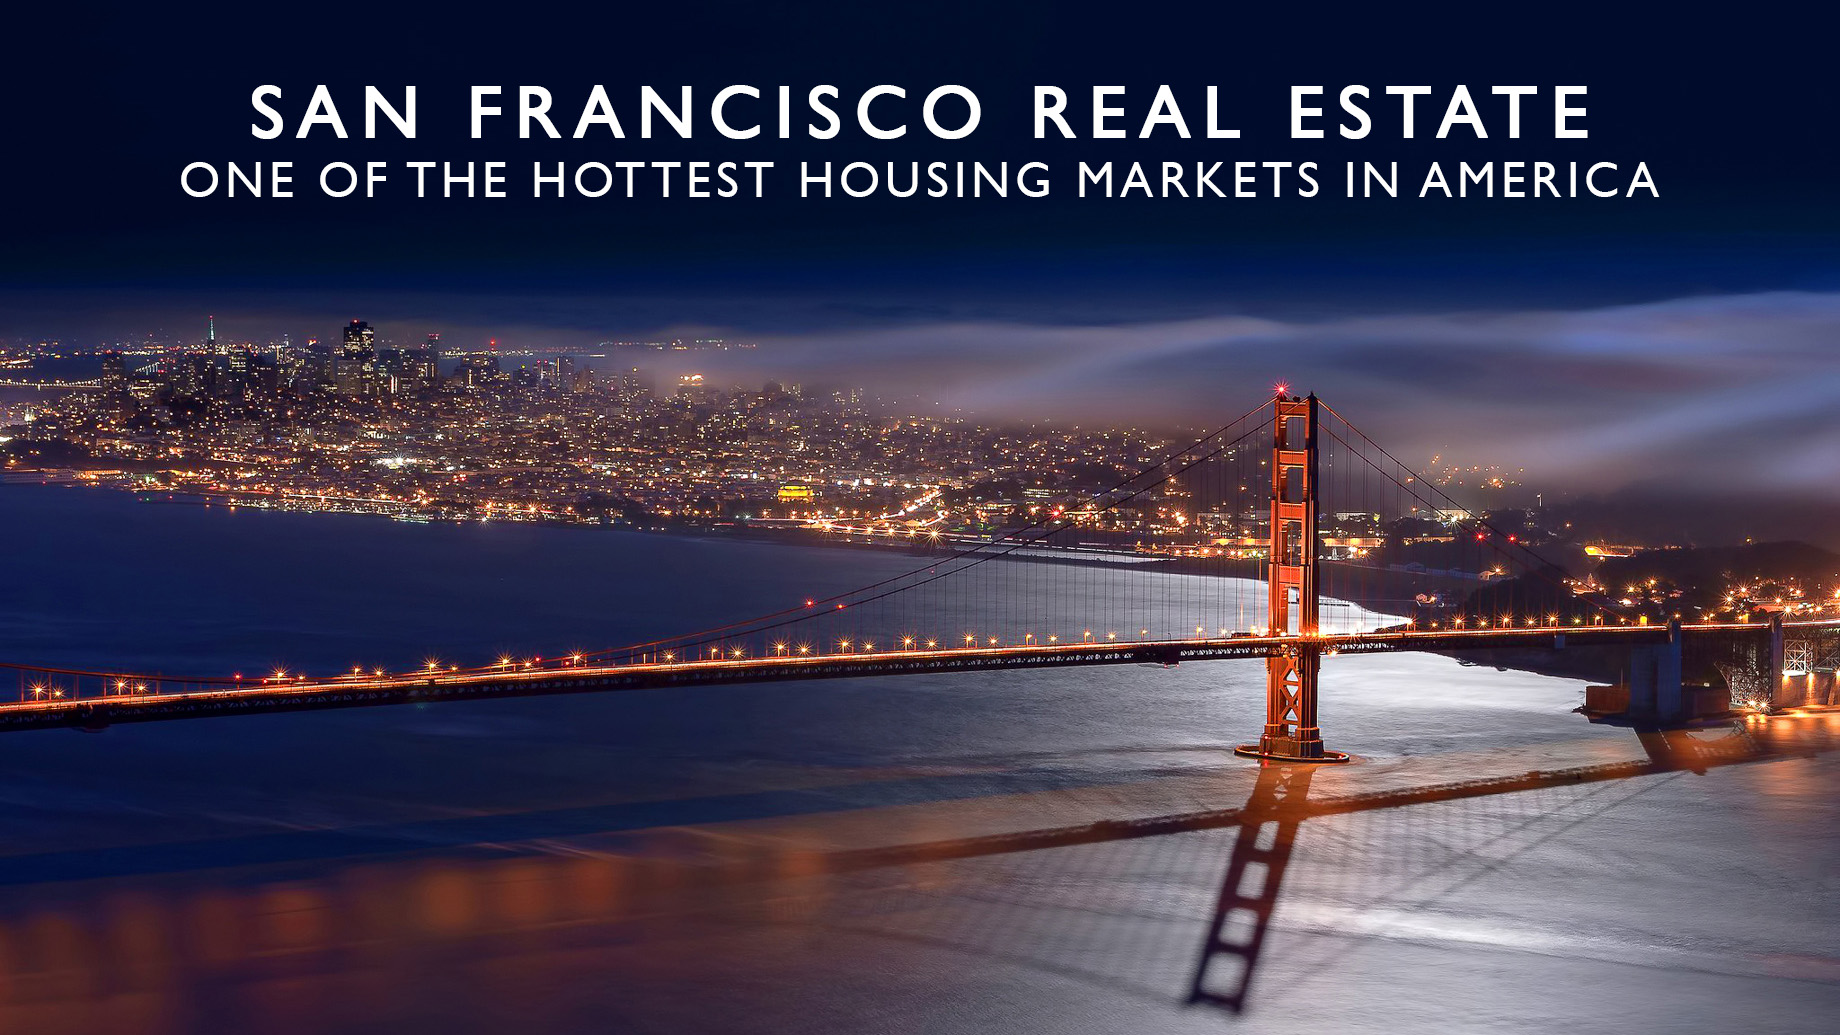 San Francisco Real Estate – One of the Hottest Housing Markets in America